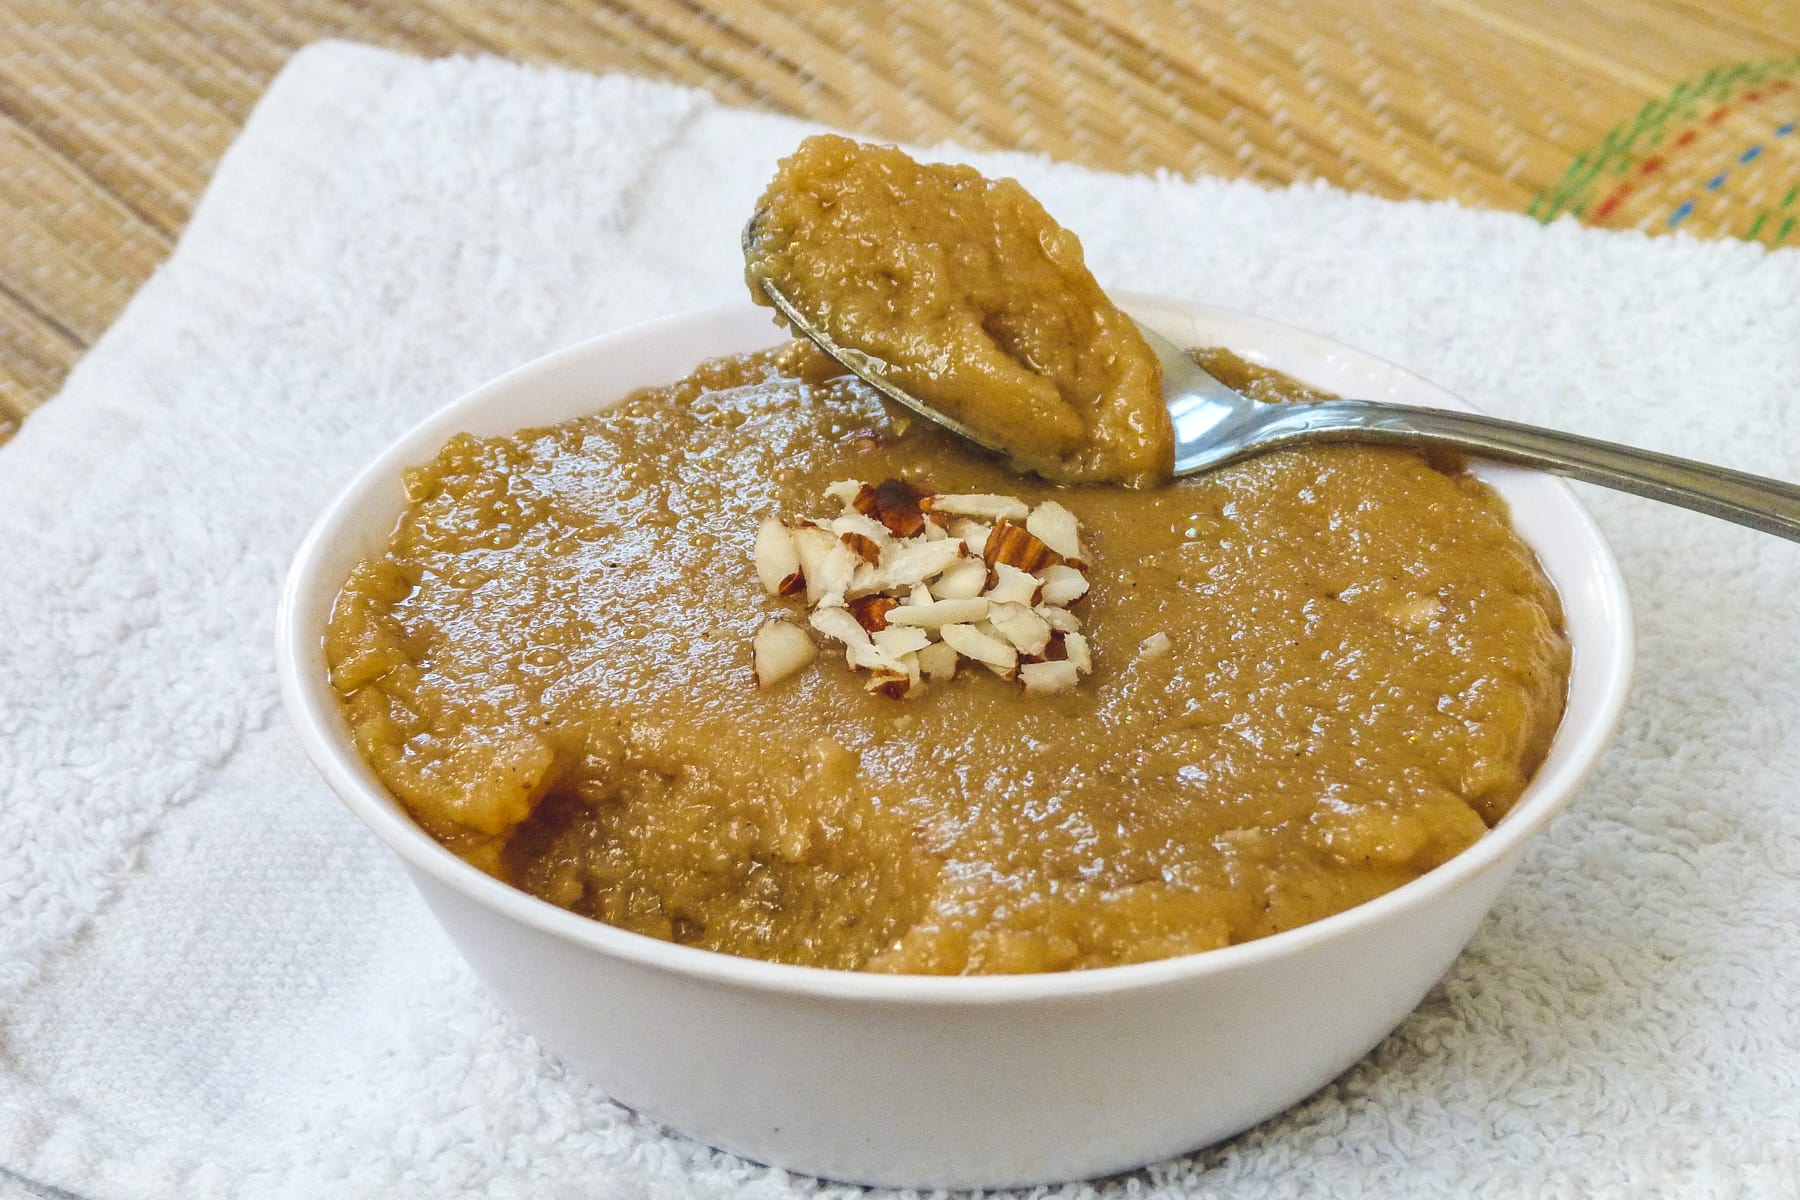 a spoon full ora rajgira halwa taken from the bowl and ready to eat